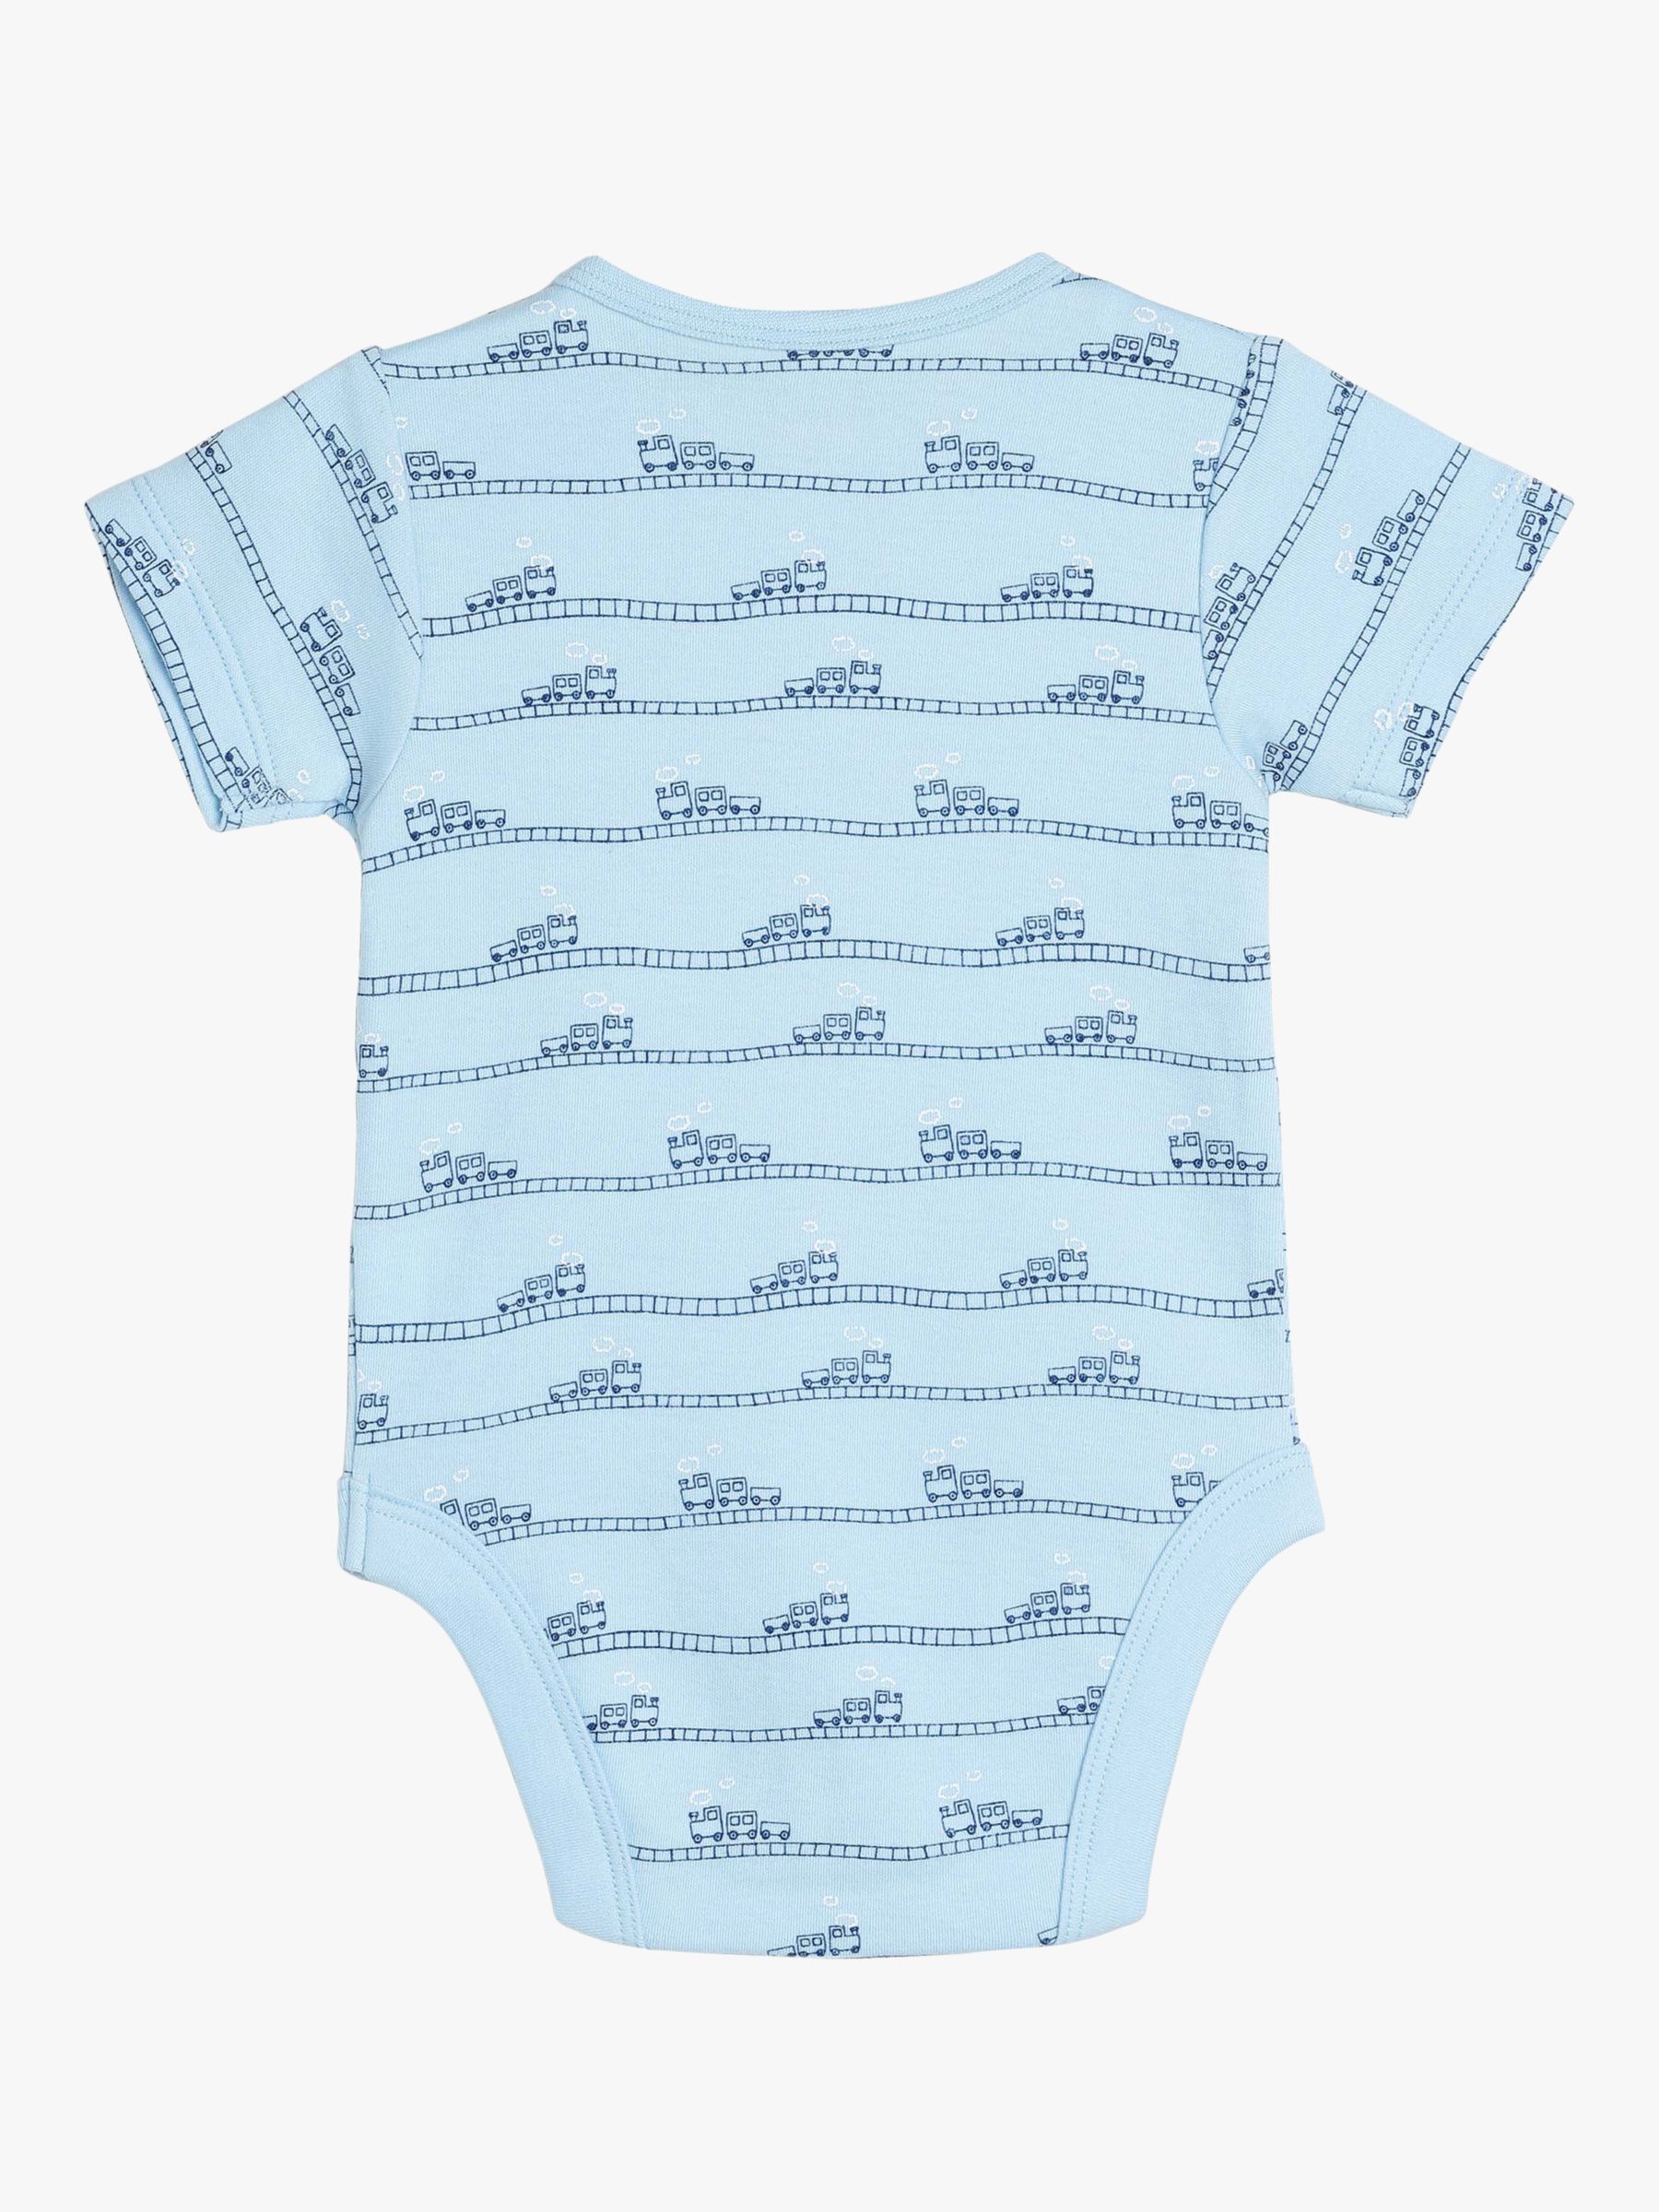 Mini Cuddles Baby Planes, Trains & Automobile Graphic Bodysuits, Pack of 3, Multi, 6-9 months